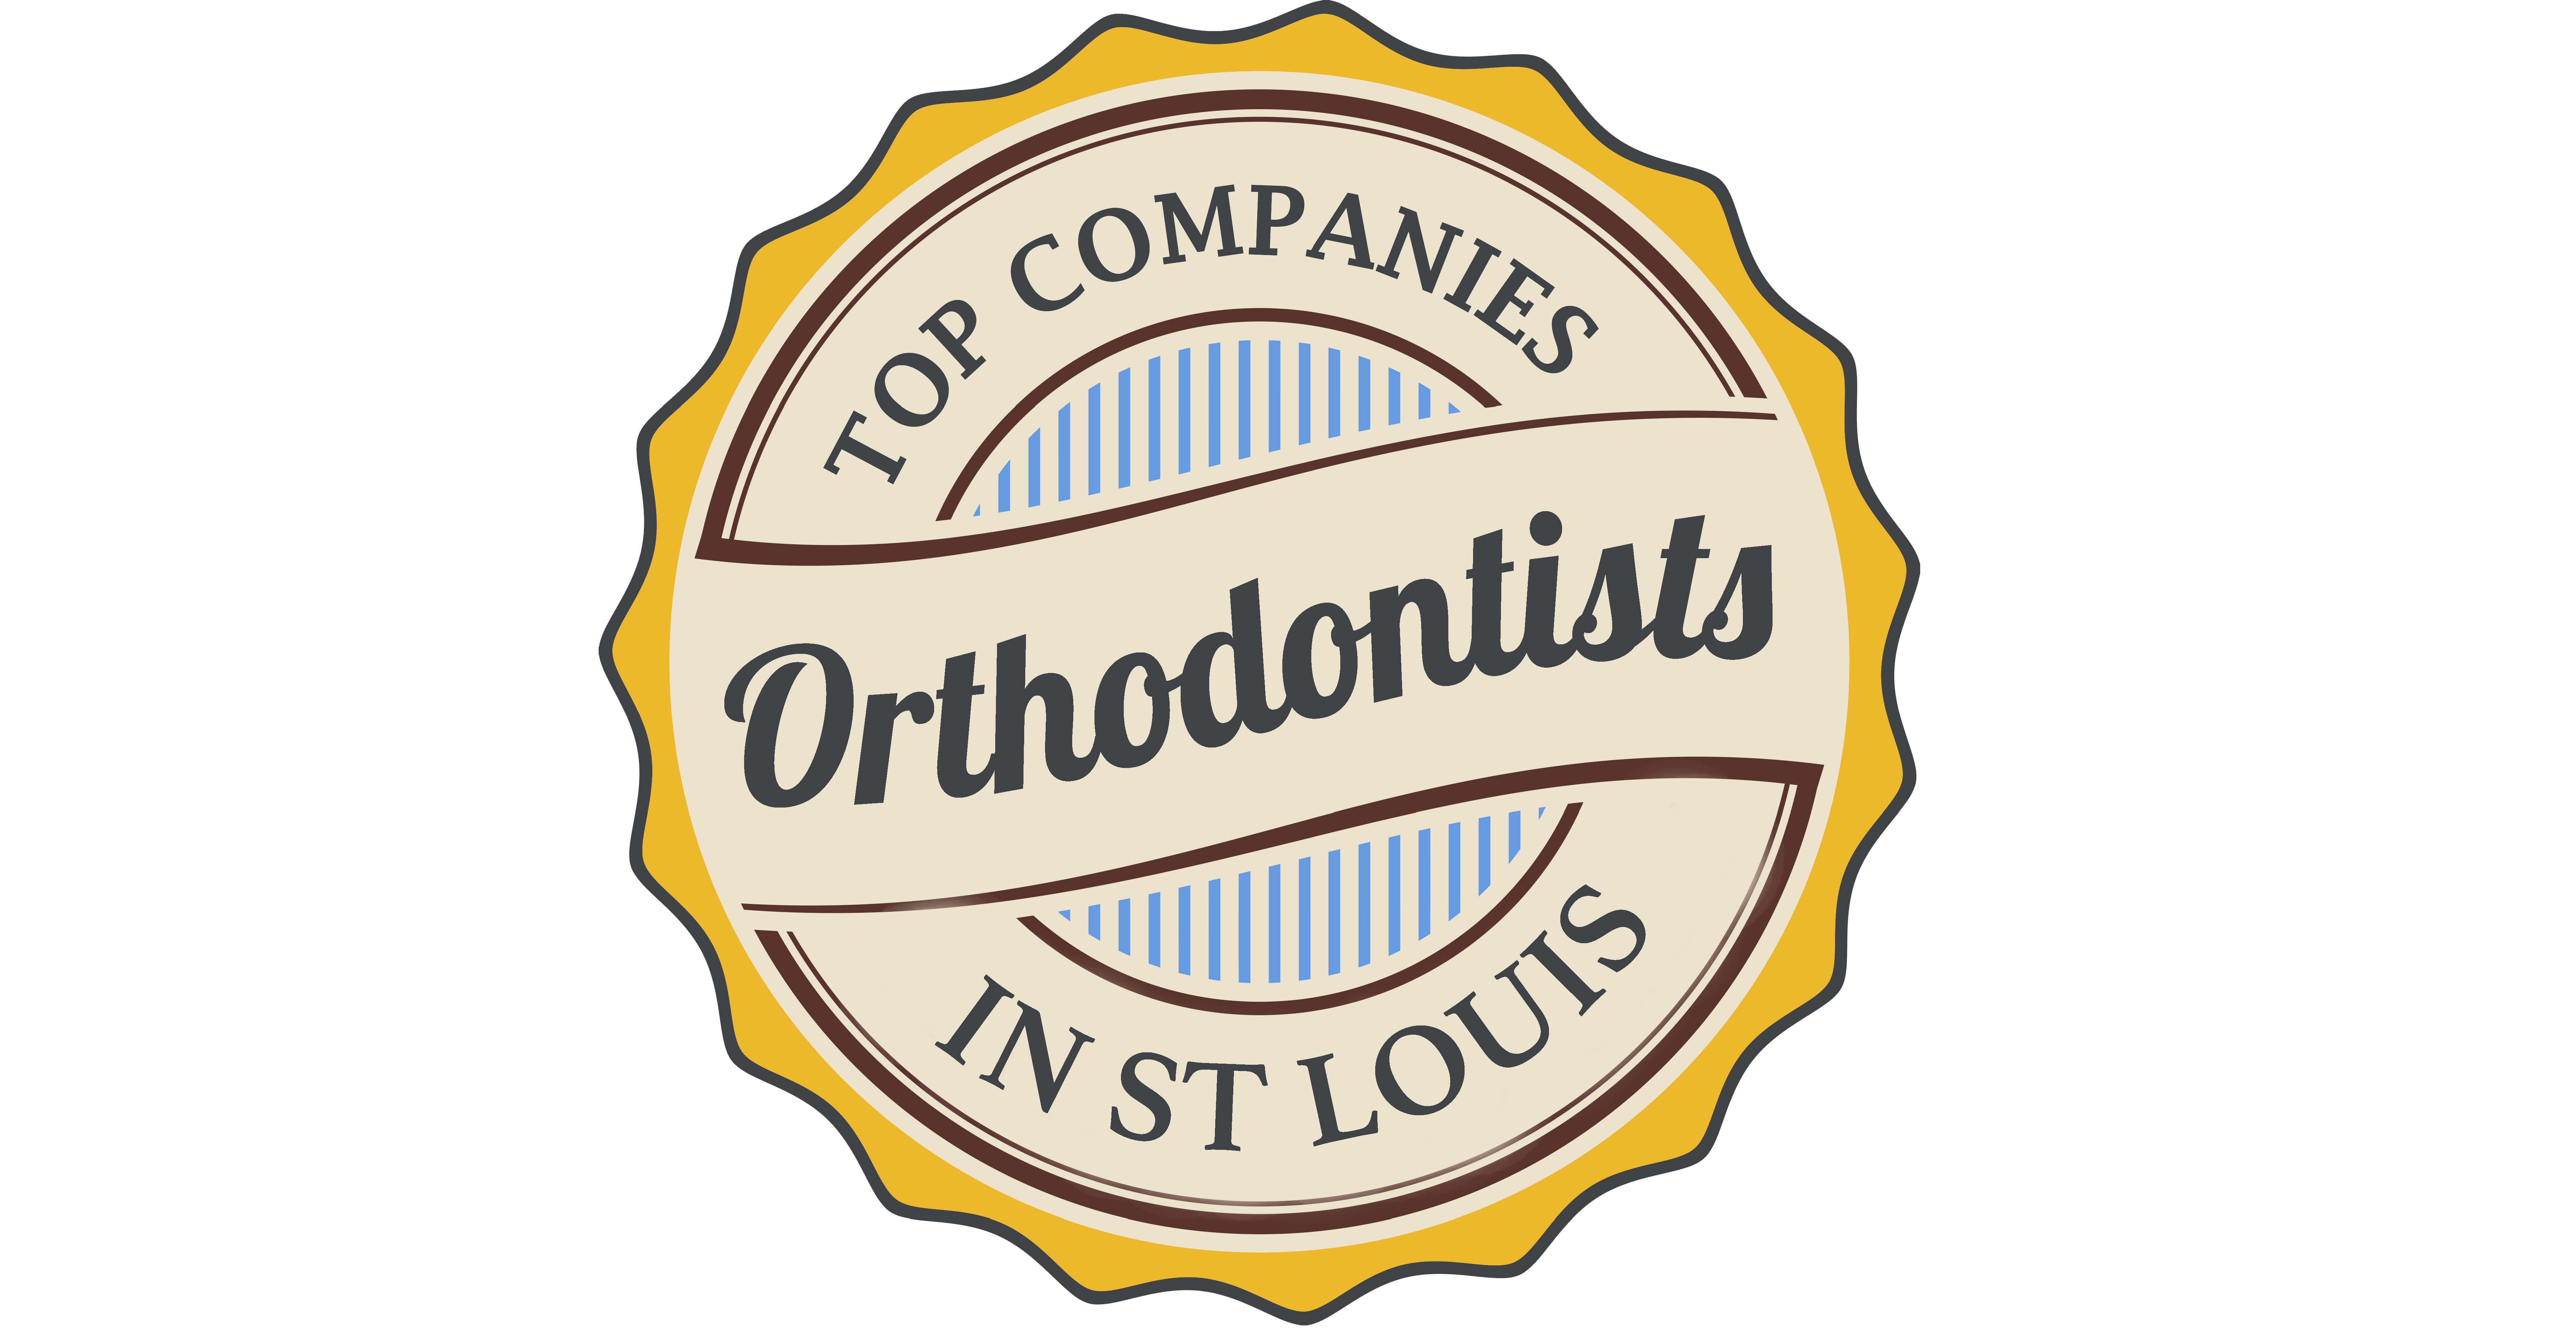 Top 10 St. Louis Orthodontists